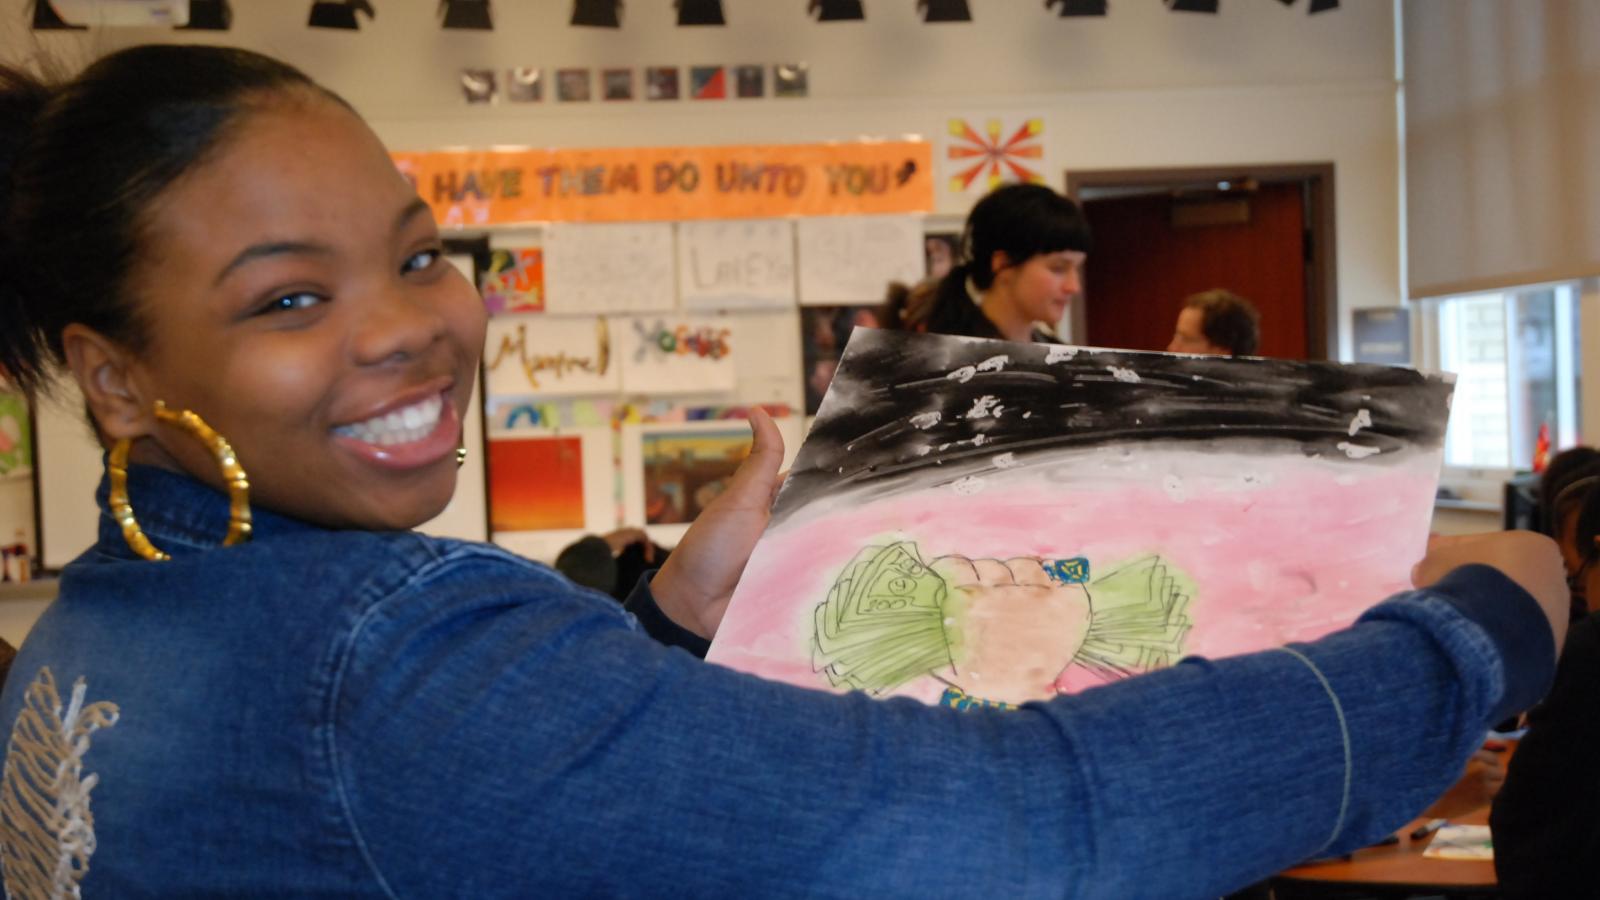 A young person smiles and holds up a piece of artwork